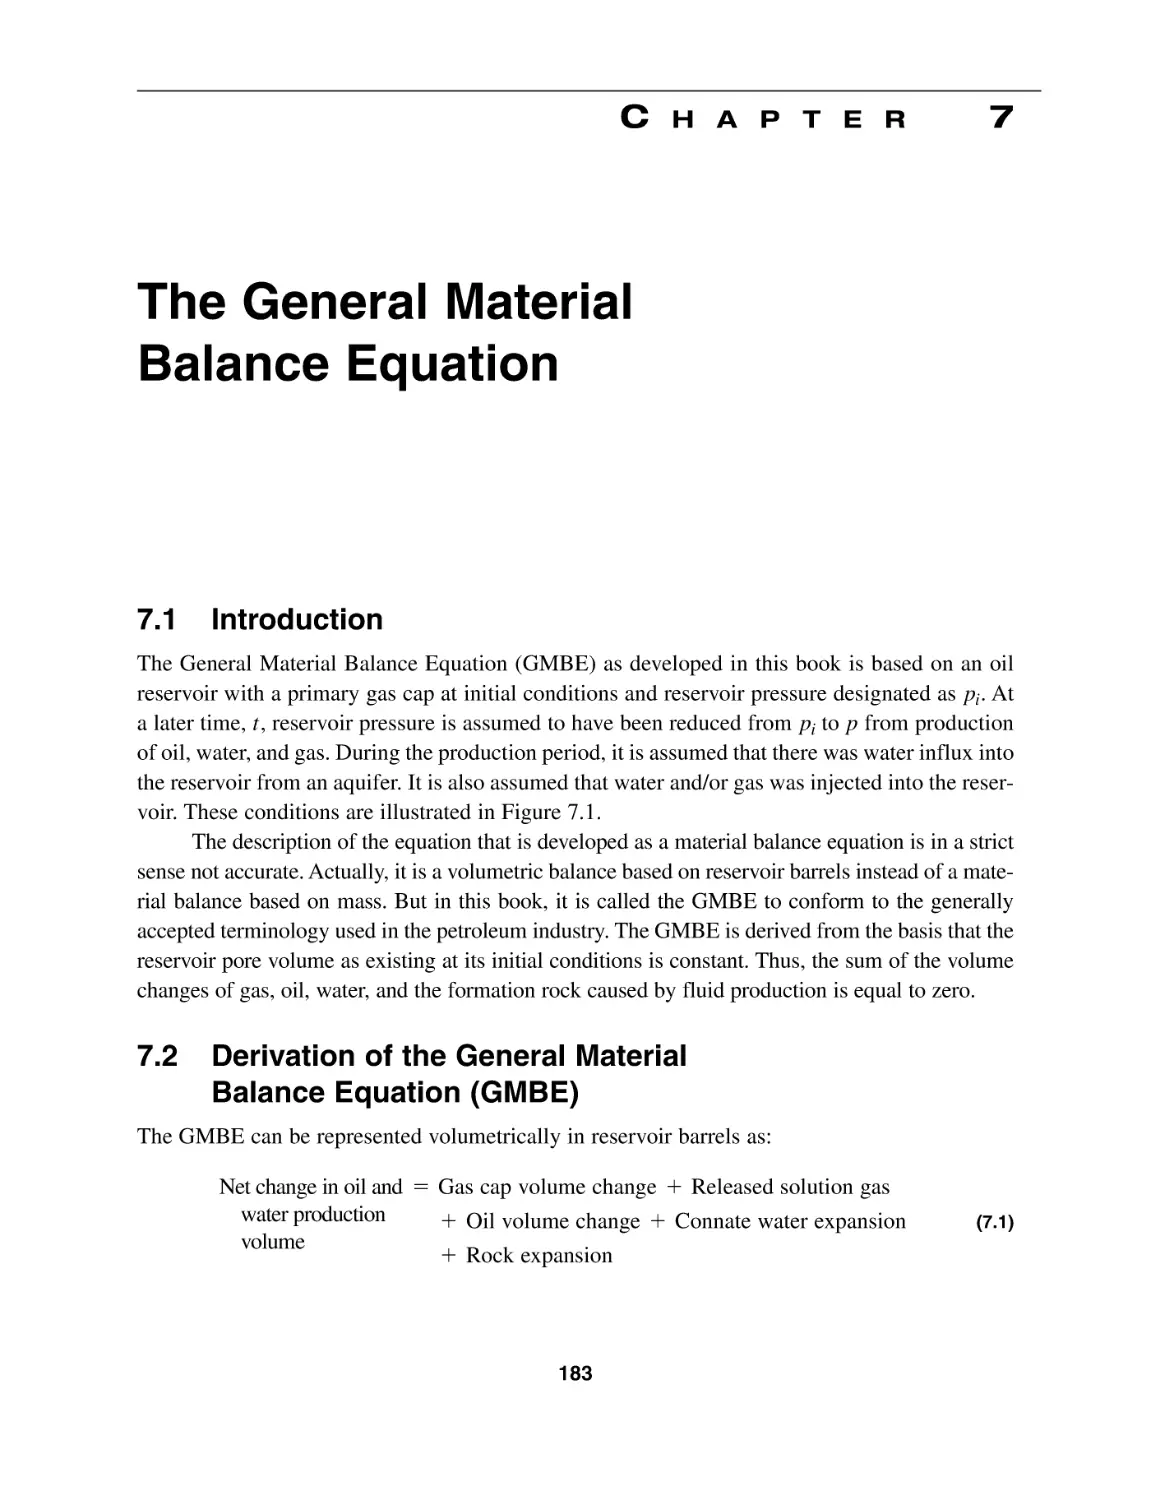 Chapter 7 The General Material Balance Equation
7.1 Introduction
7.2 Derivation of the General Material Balance Equation (GMBE)